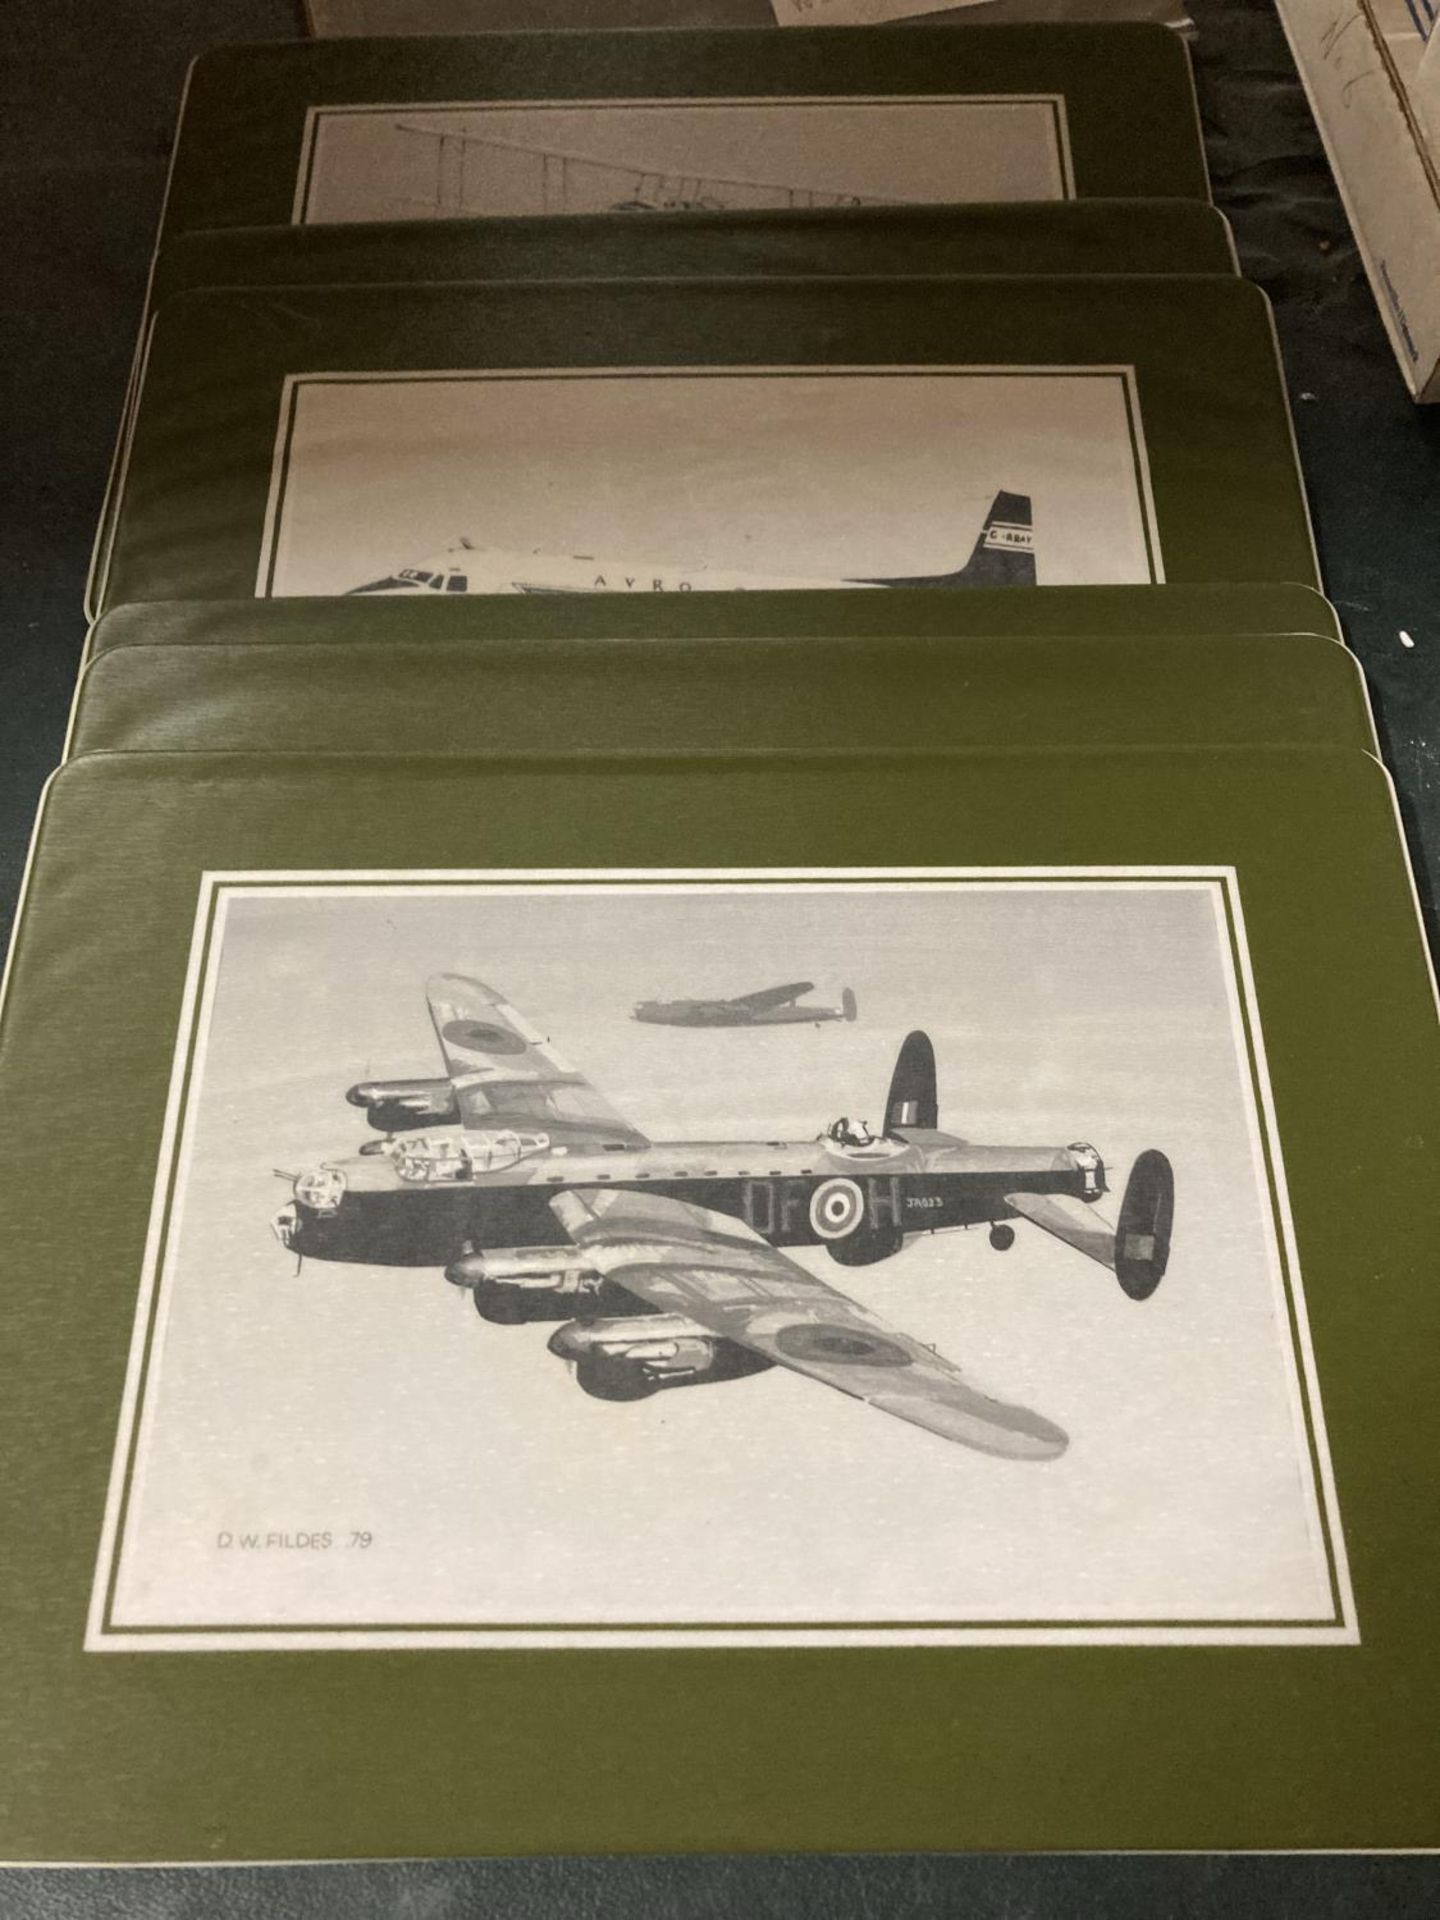 A SET OF SIX BRITISH AEROSPACE PLASTIC PLACEMATS FEATURING DIFFERENT AVRO AIRCRAFT, SIGNED AND DATED